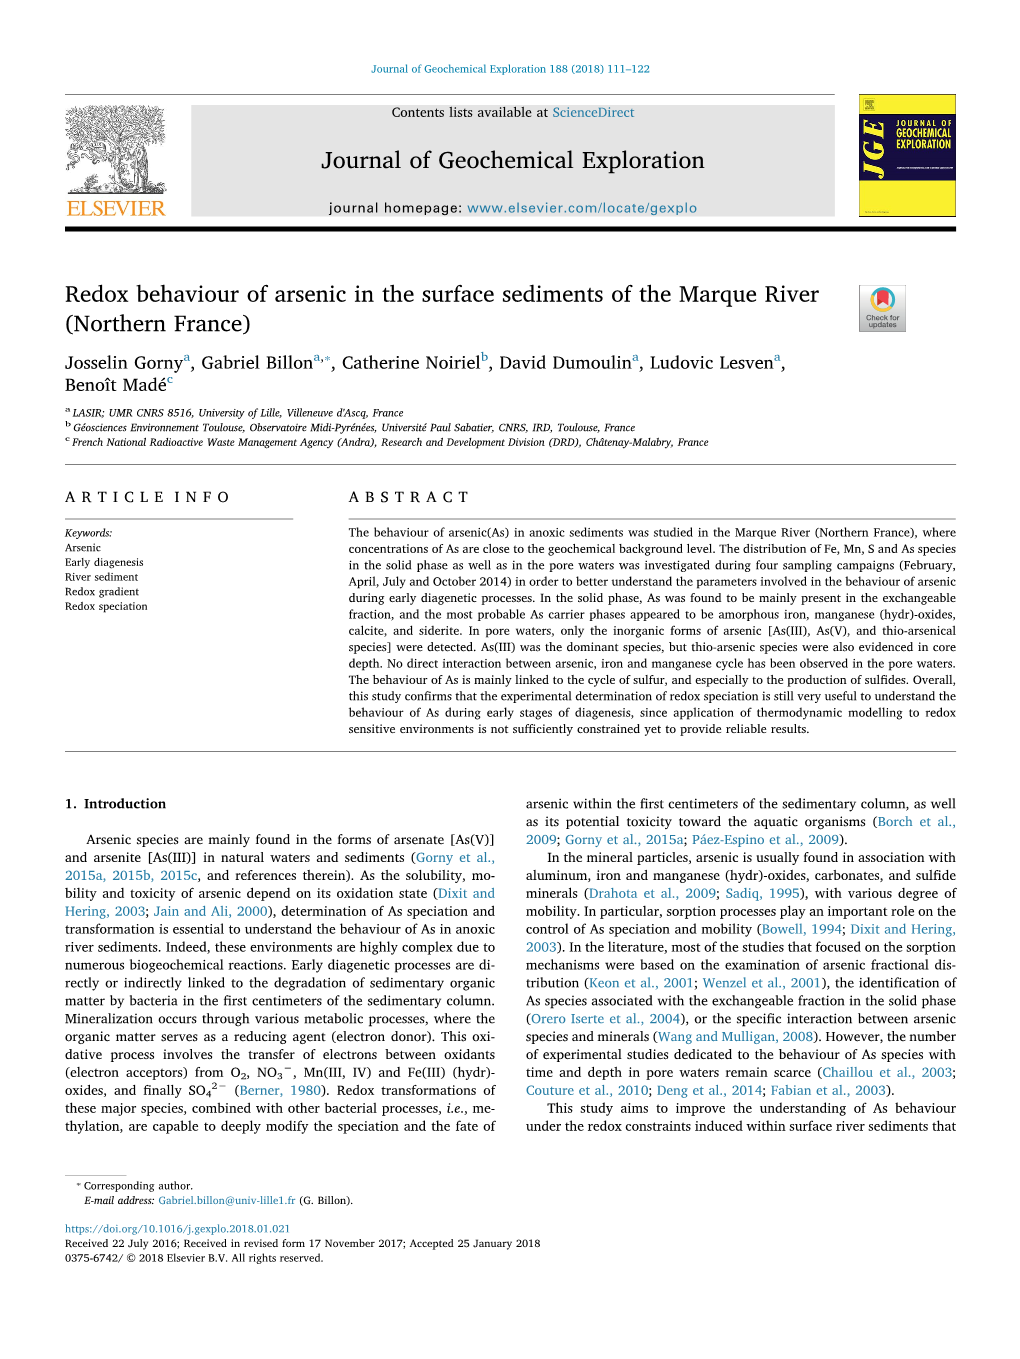 Redox Behaviour of Arsenic in the Surface Sediments of the Marque